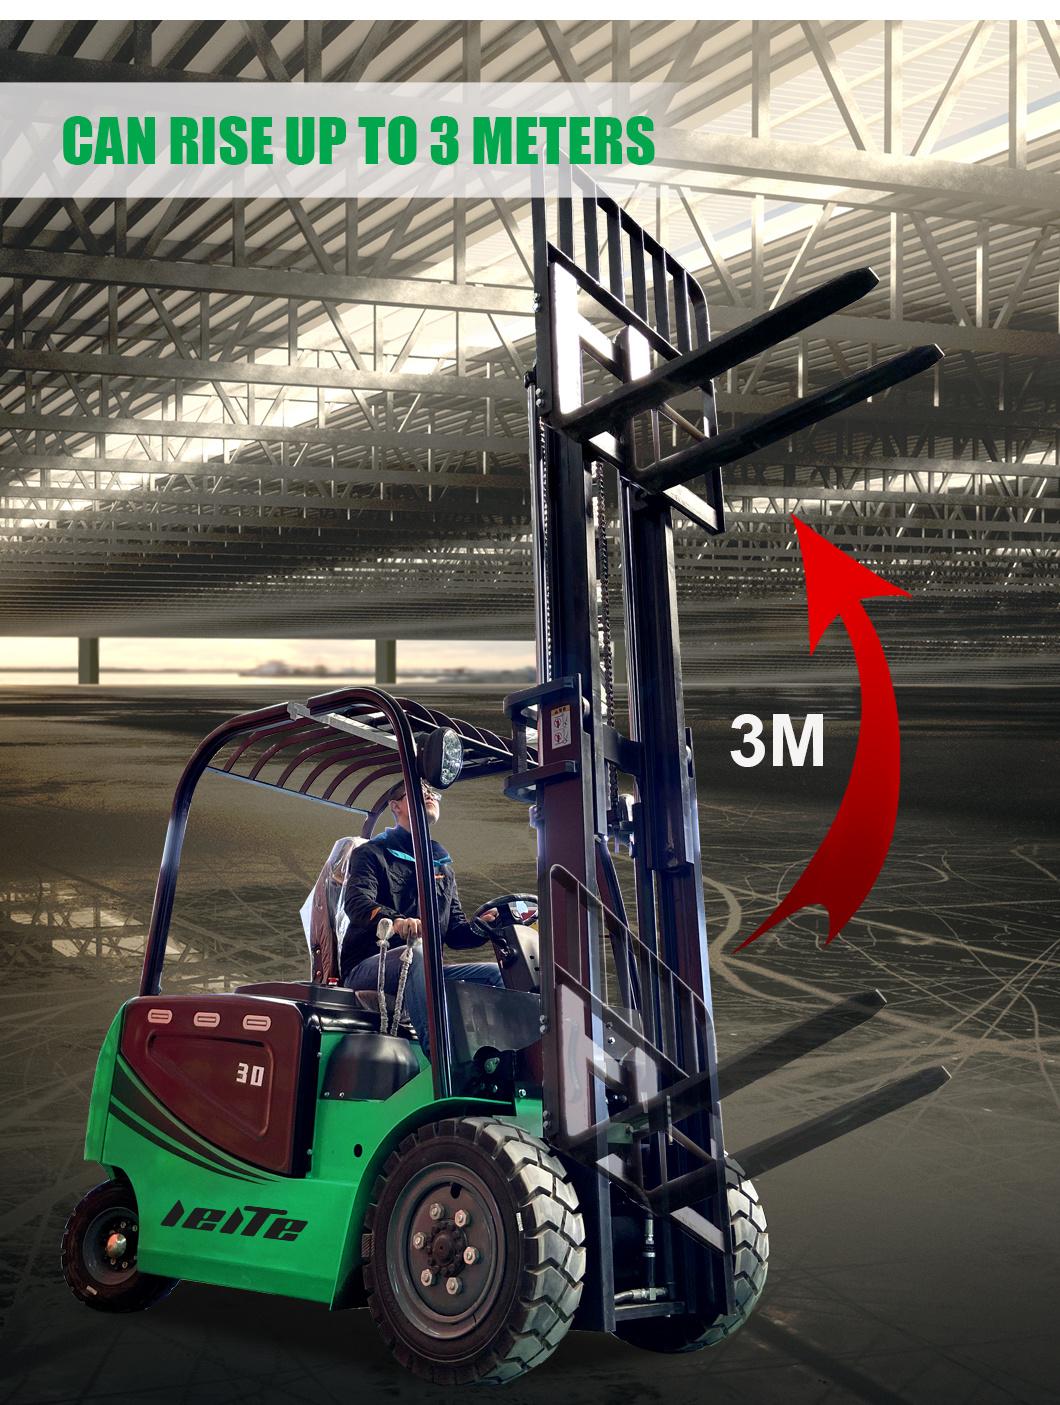 Hot Sale 1-3 Ton Electric Forklift Truck International Brand Controller Economy Forklift High Performance with CE Electric Forklift with Attachment